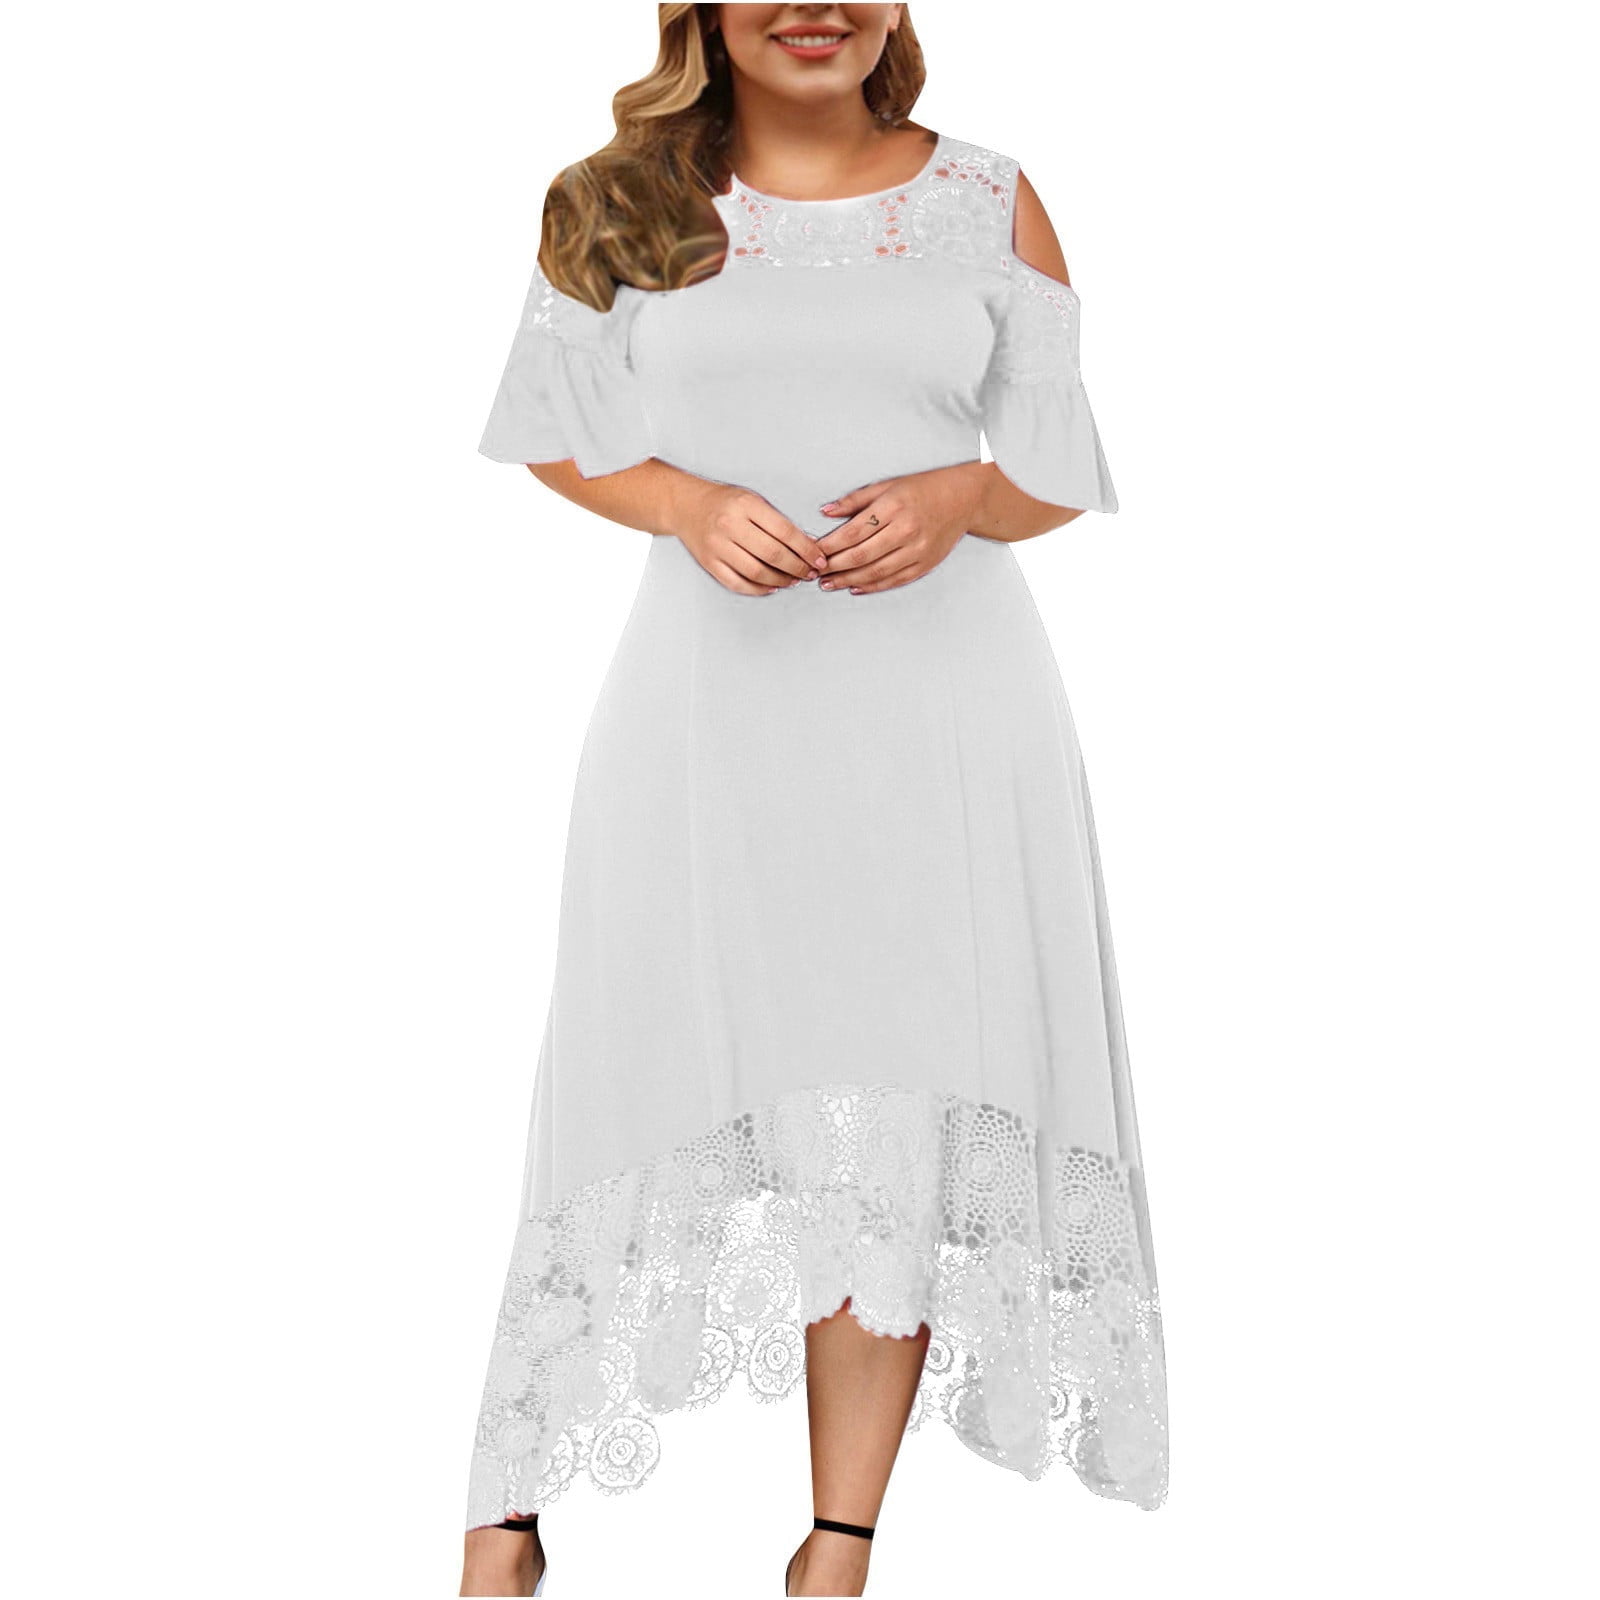 Supersonic hastighed Gym 945 RKZDSR Summer Plus Size Maxi Dress for Women Sexy Short Sleeve Strapless  Ruffle Swing Dress High-Low Lace Splicing Cold Shoulder Dress Elegant  Wedding Guest Dresses Solid-White XXXXL - Walmart.com